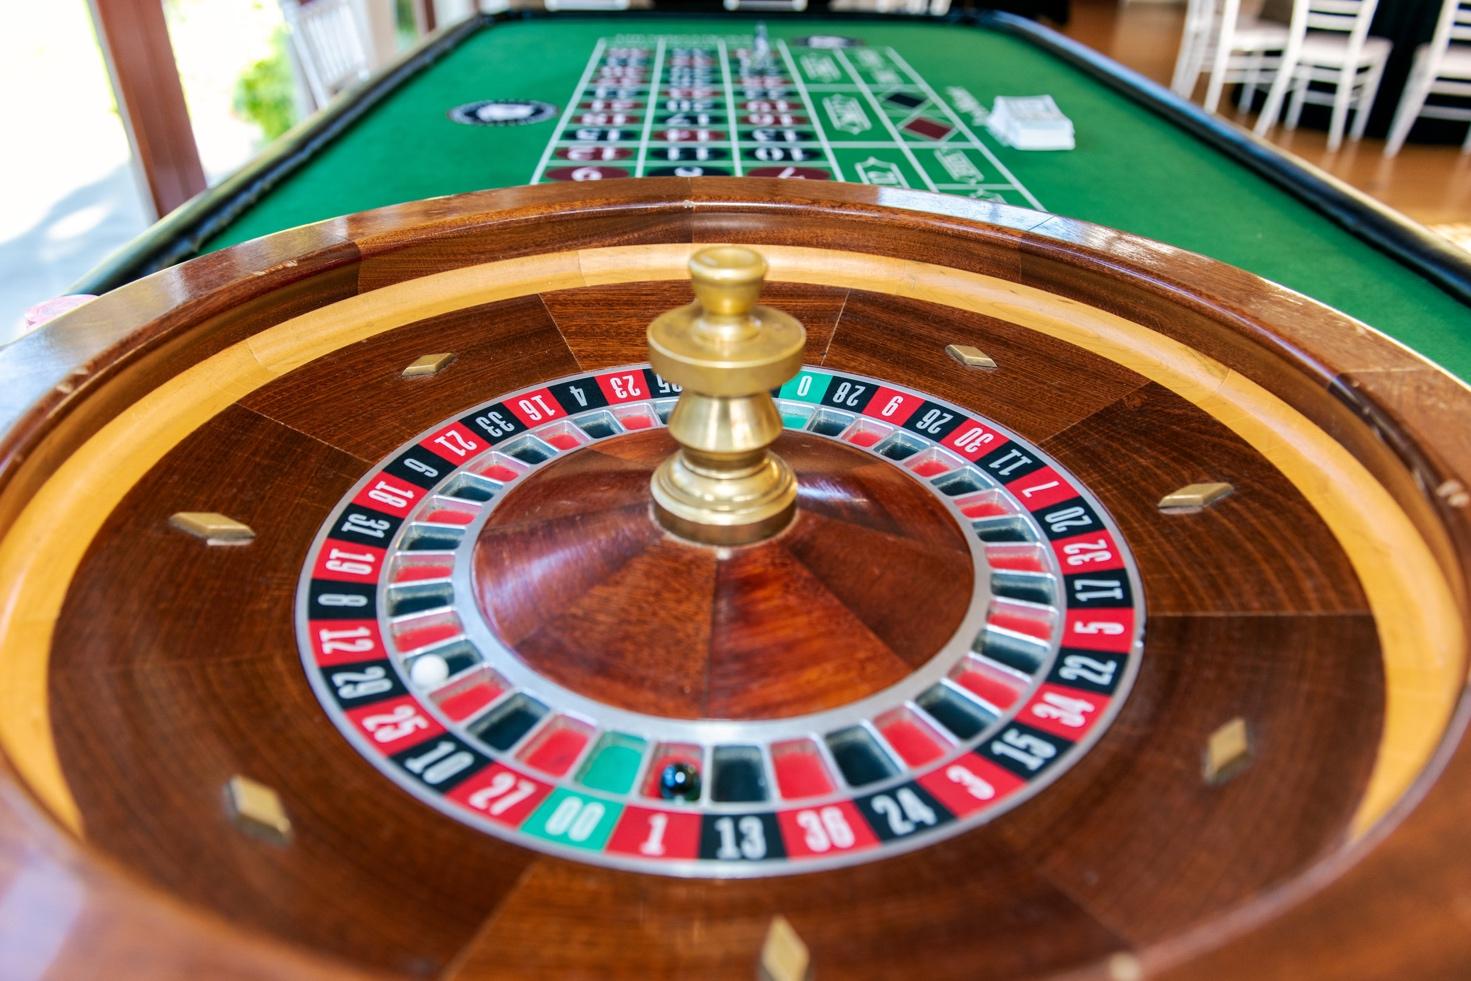 A close-up of a roulette wheel

Description automatically generated